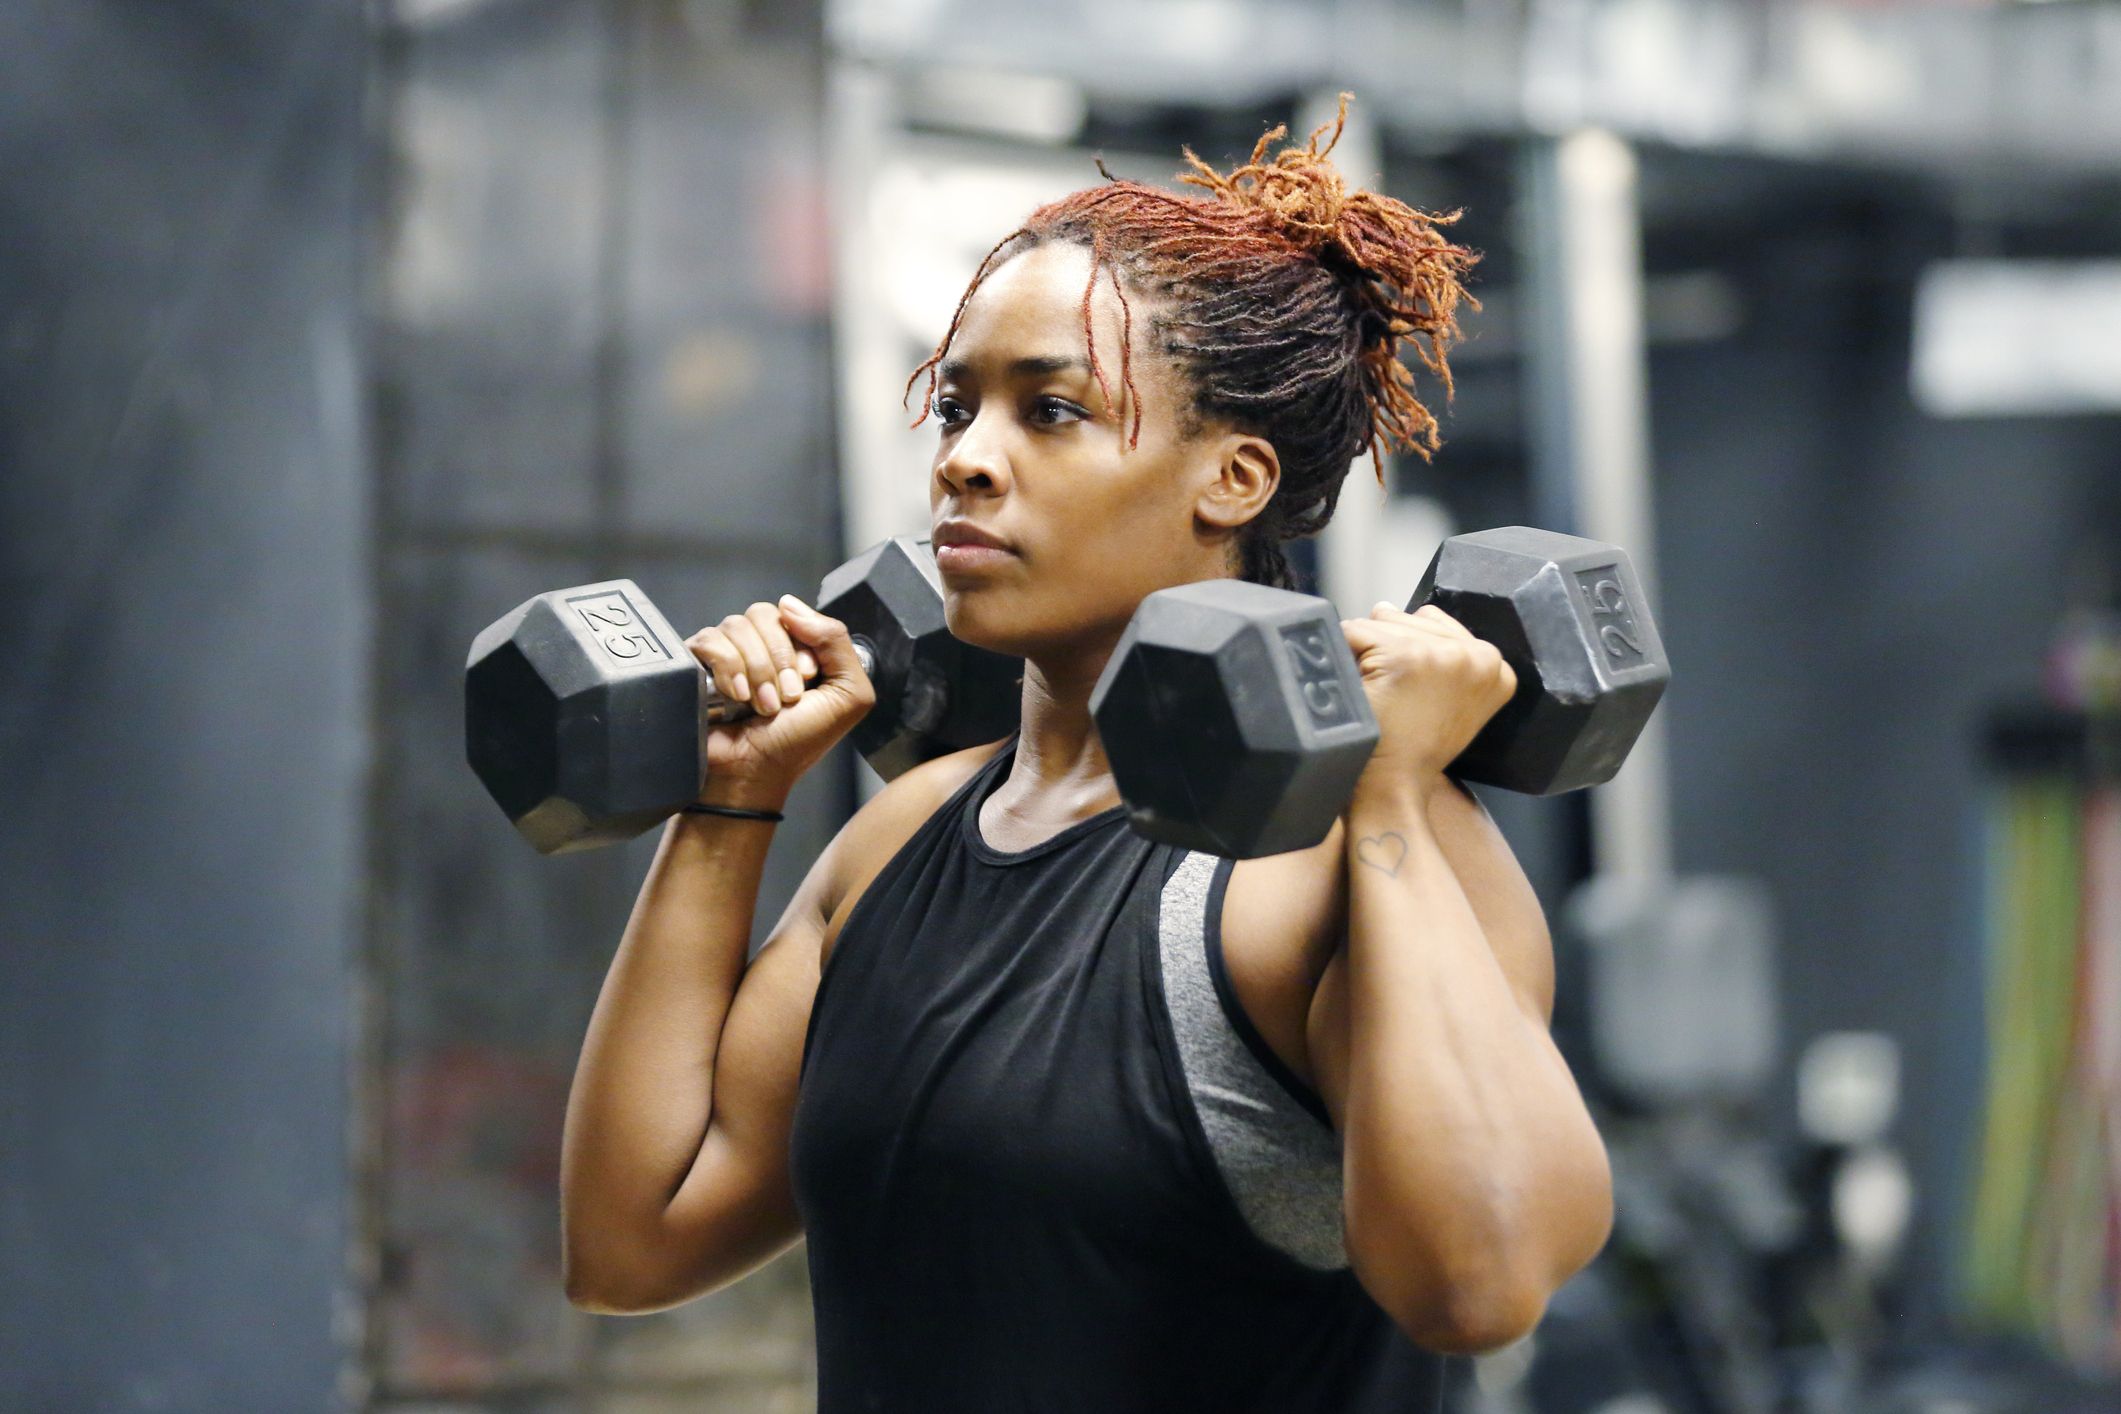 https://hips.hearstapps.com/hmg-prod/images/fit-young-african-american-woman-working-out-with-royalty-free-image-1659701314.jpg